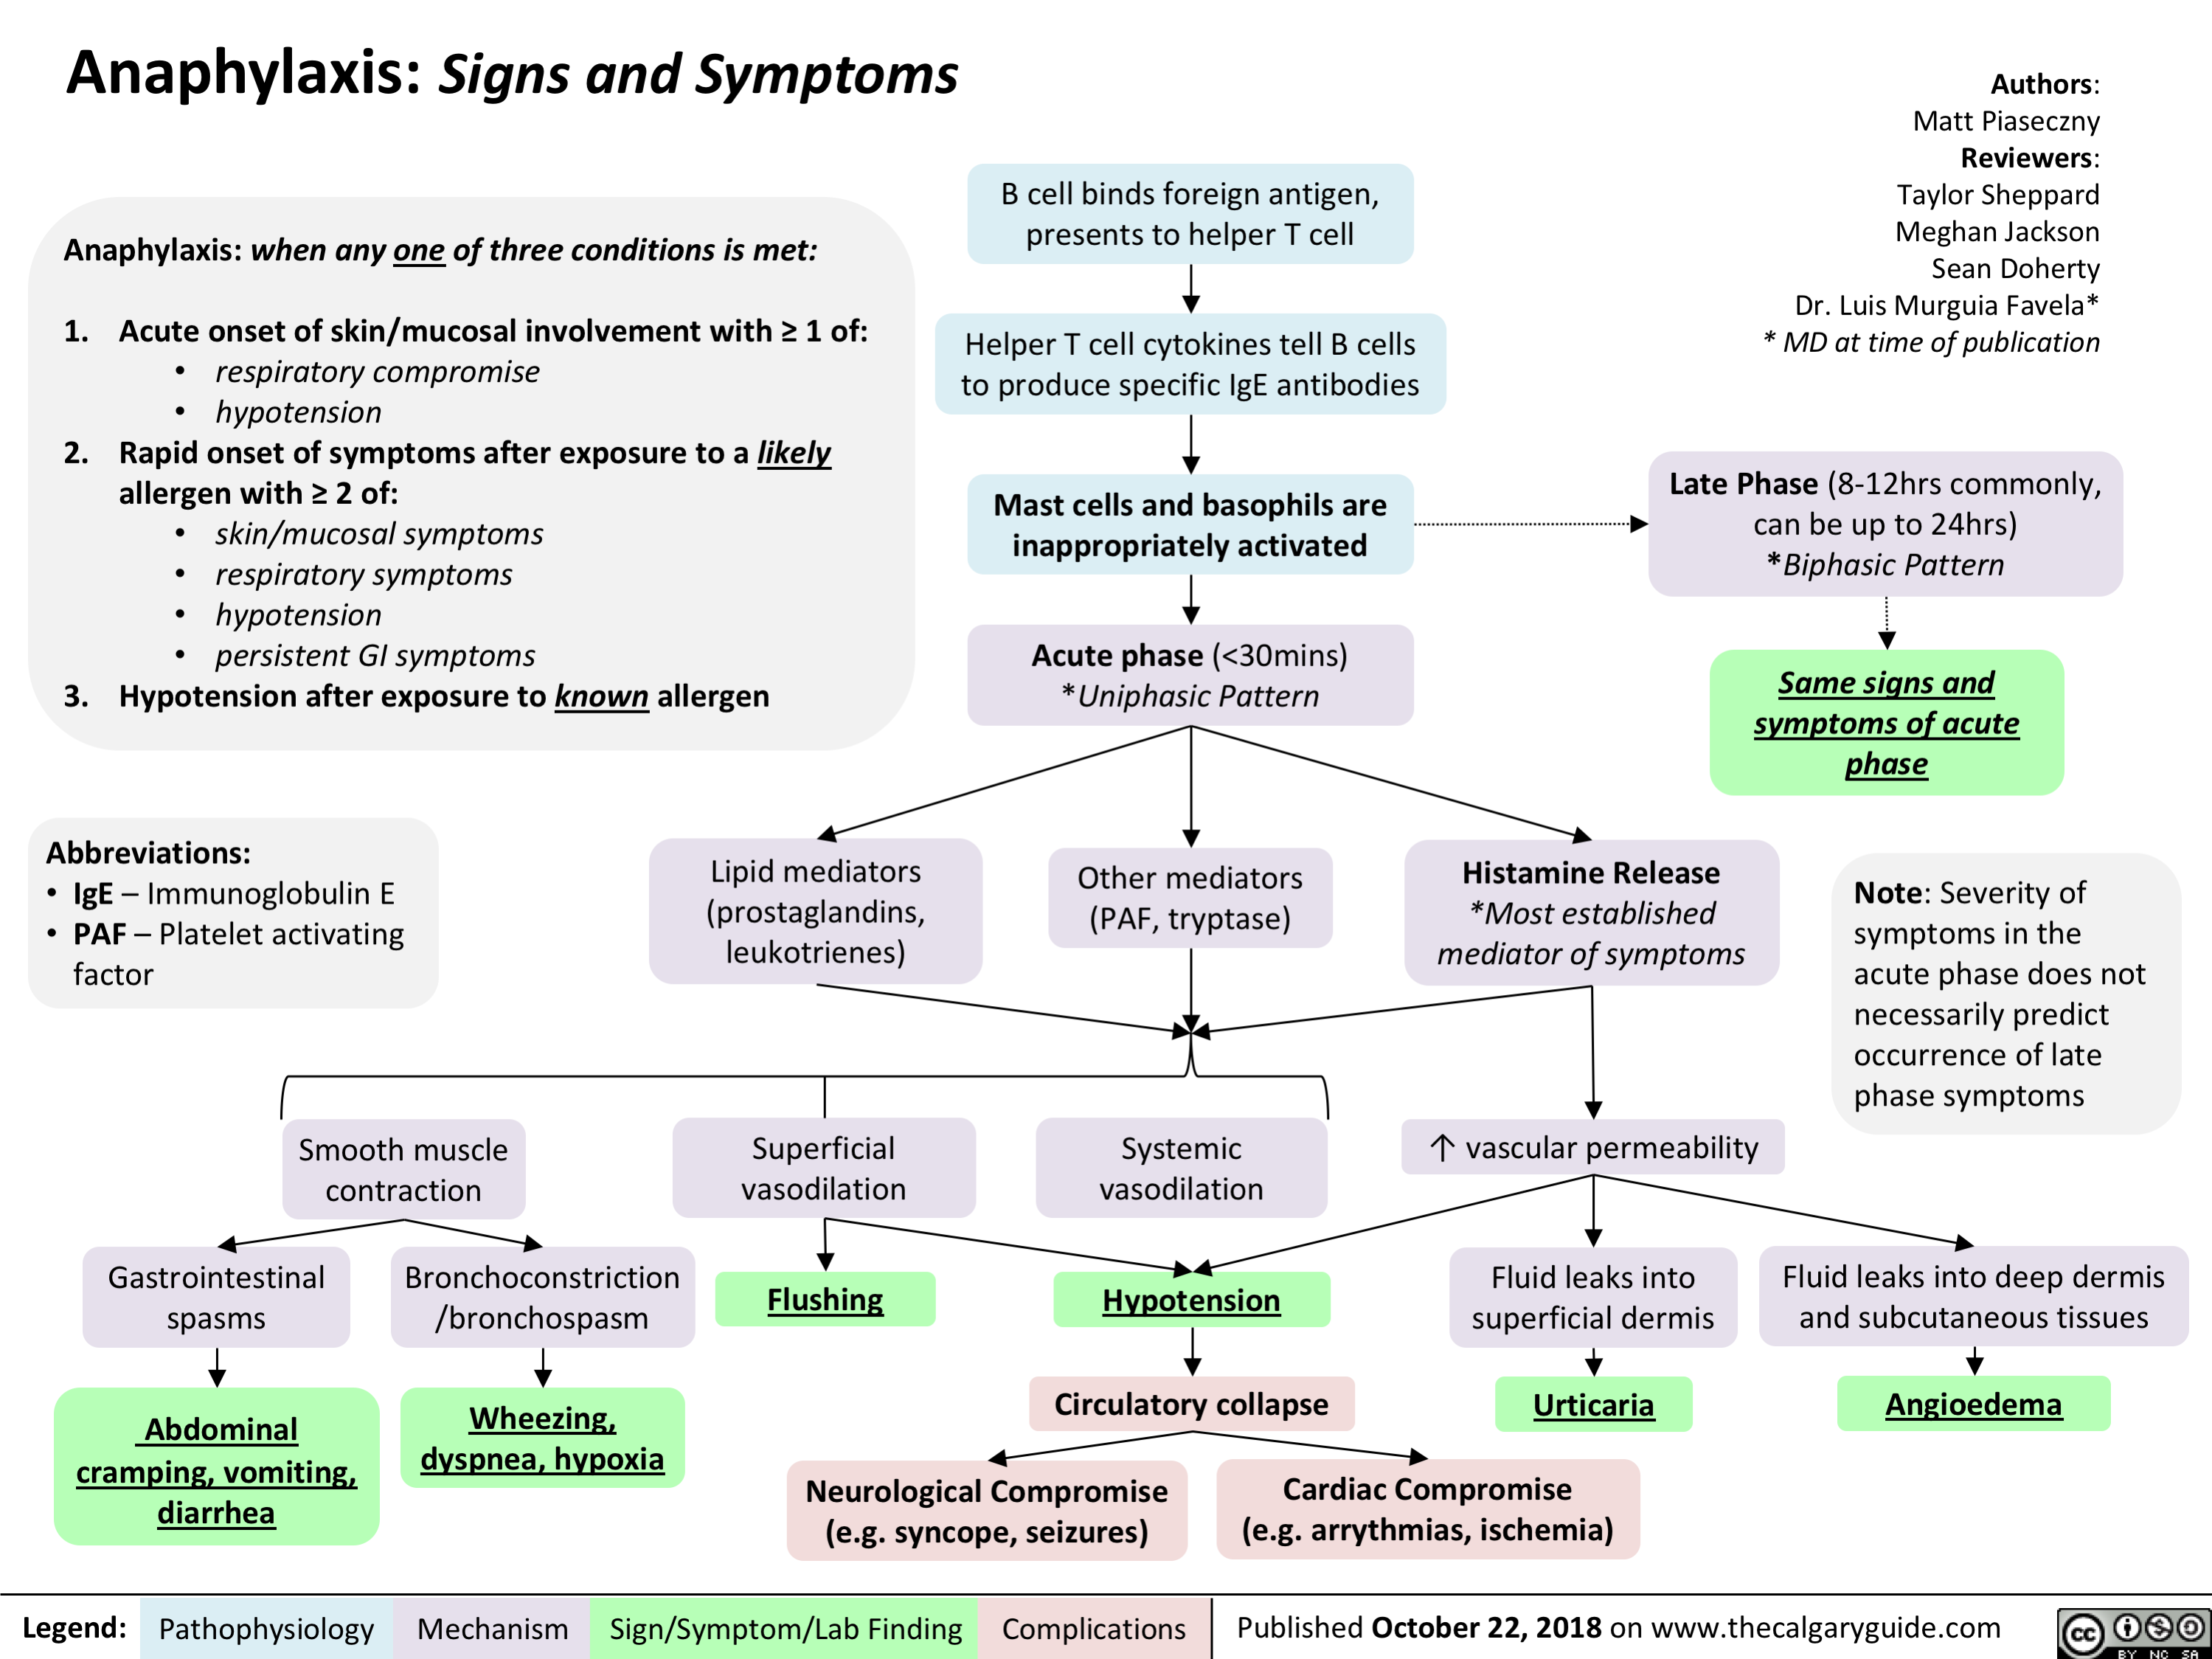 Signs and Sx of Anaphylaxis